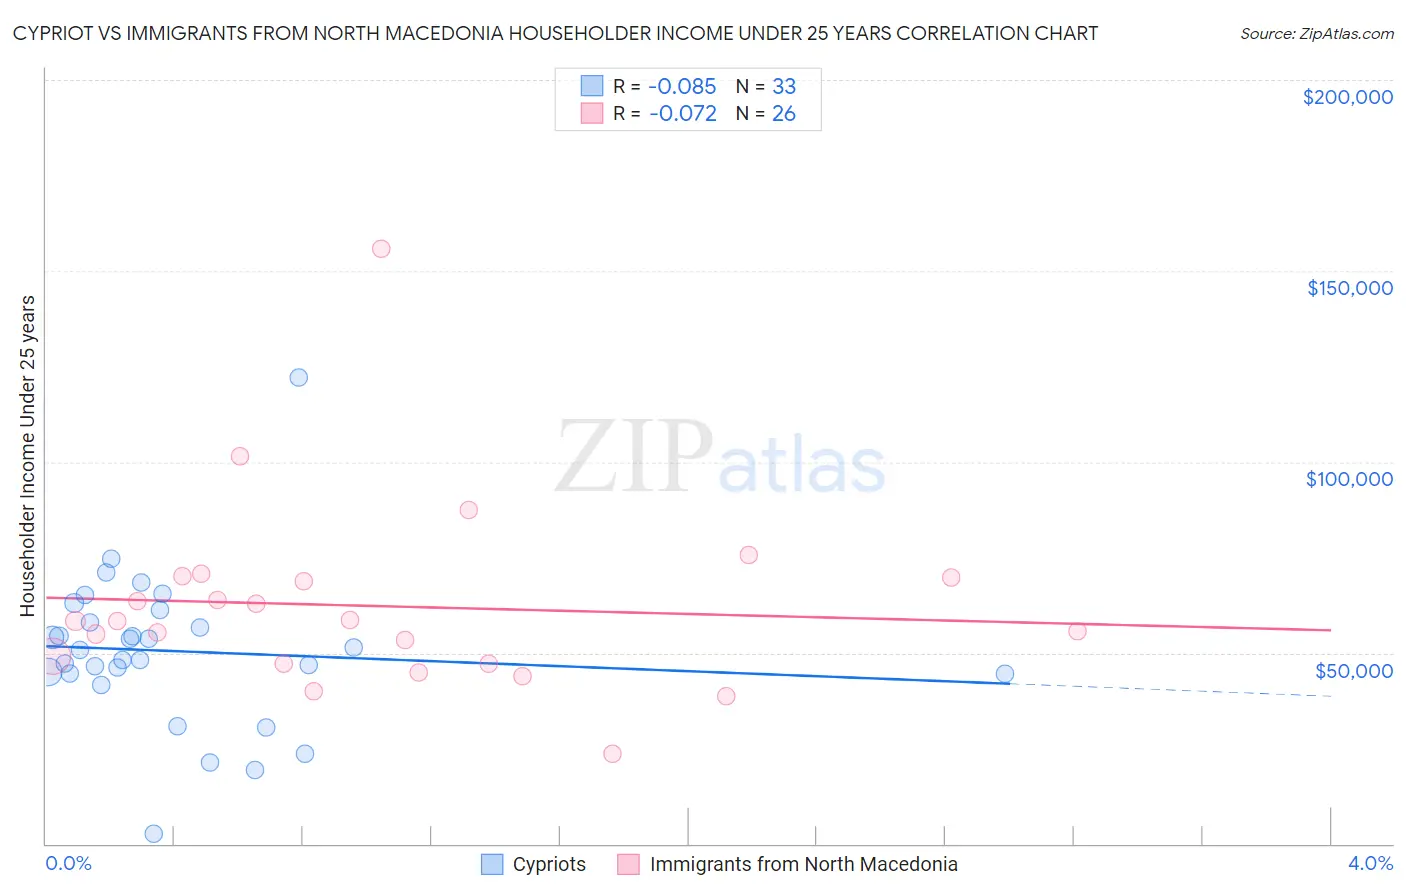 Cypriot vs Immigrants from North Macedonia Householder Income Under 25 years